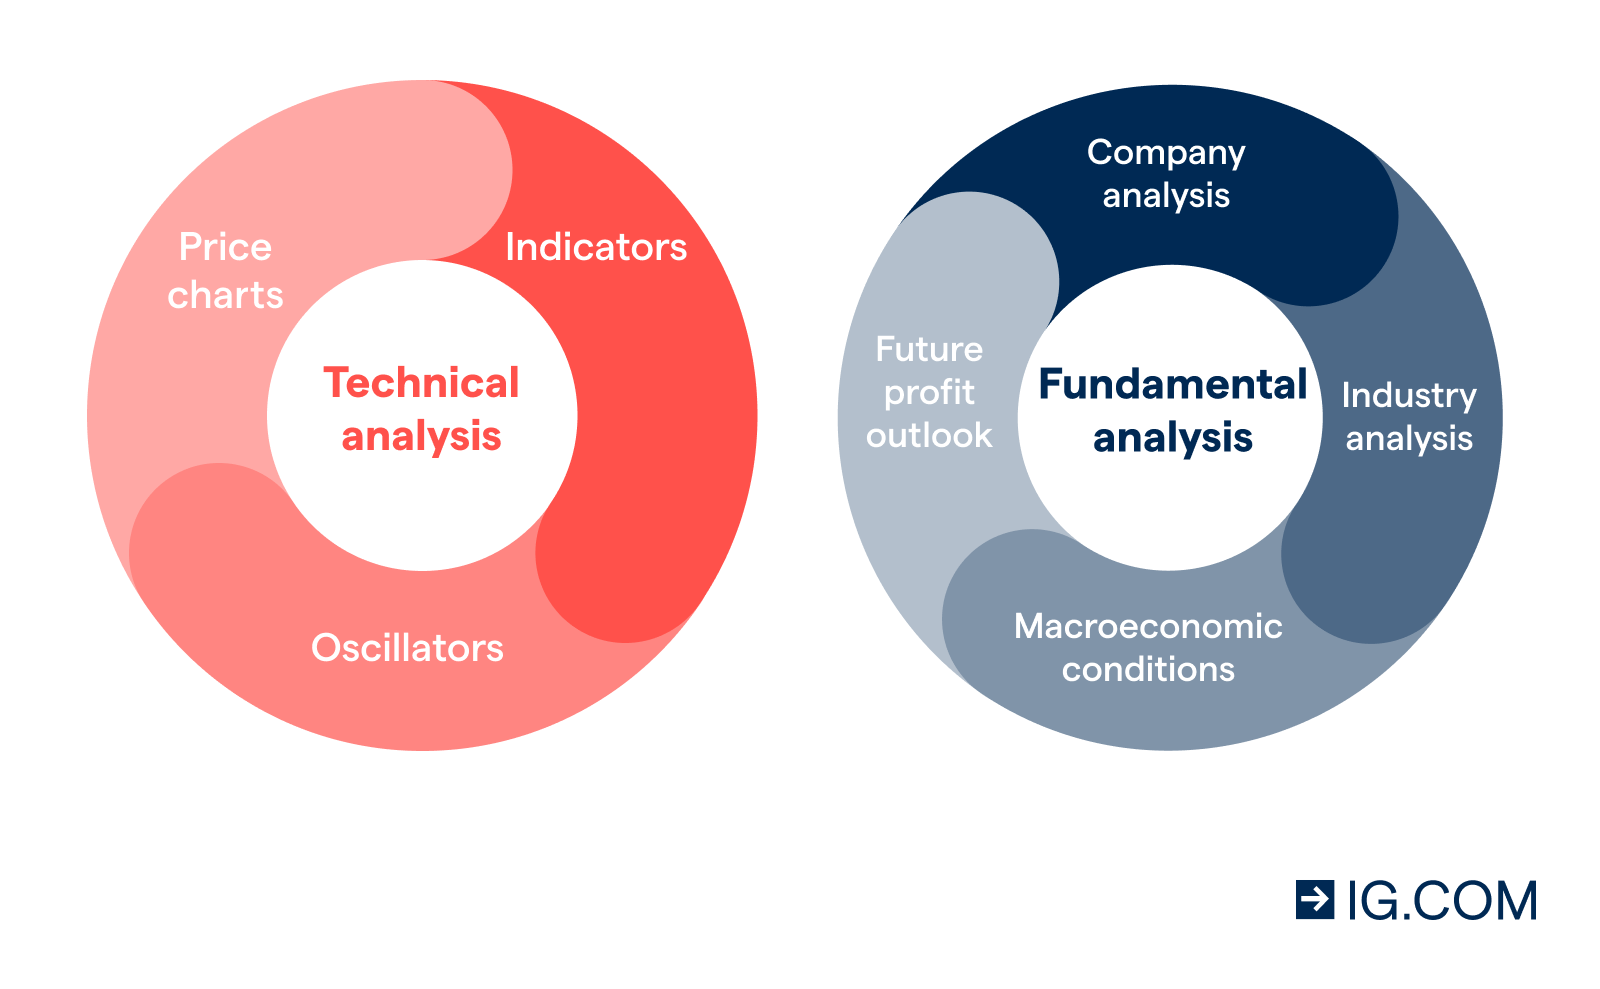 What is technical analysis?